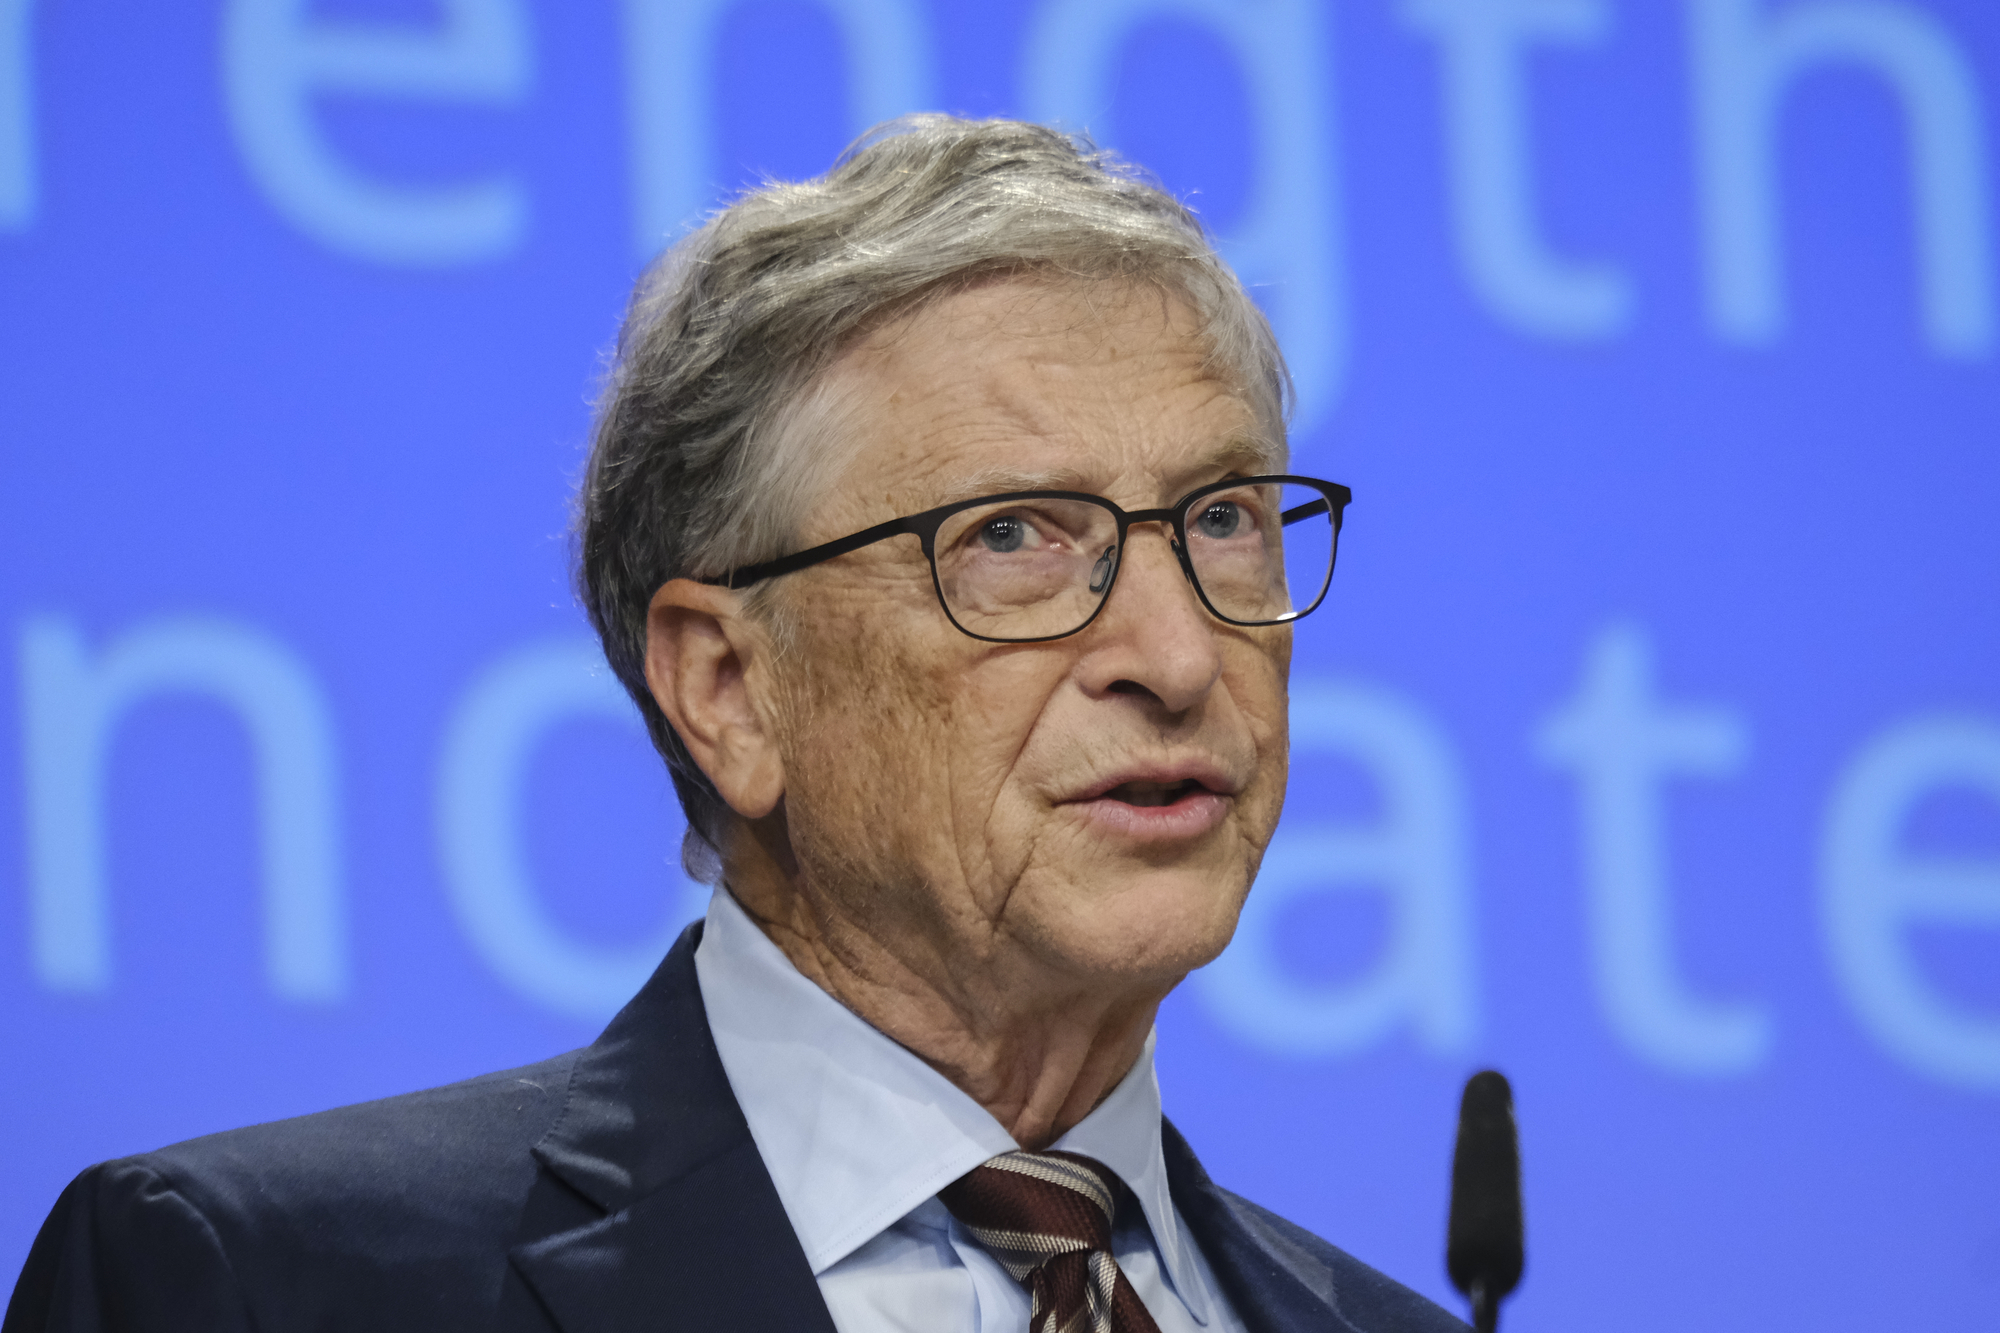 bill-gates’-summer-reading-list-encourages-acts-of-service-and-deeper-connections